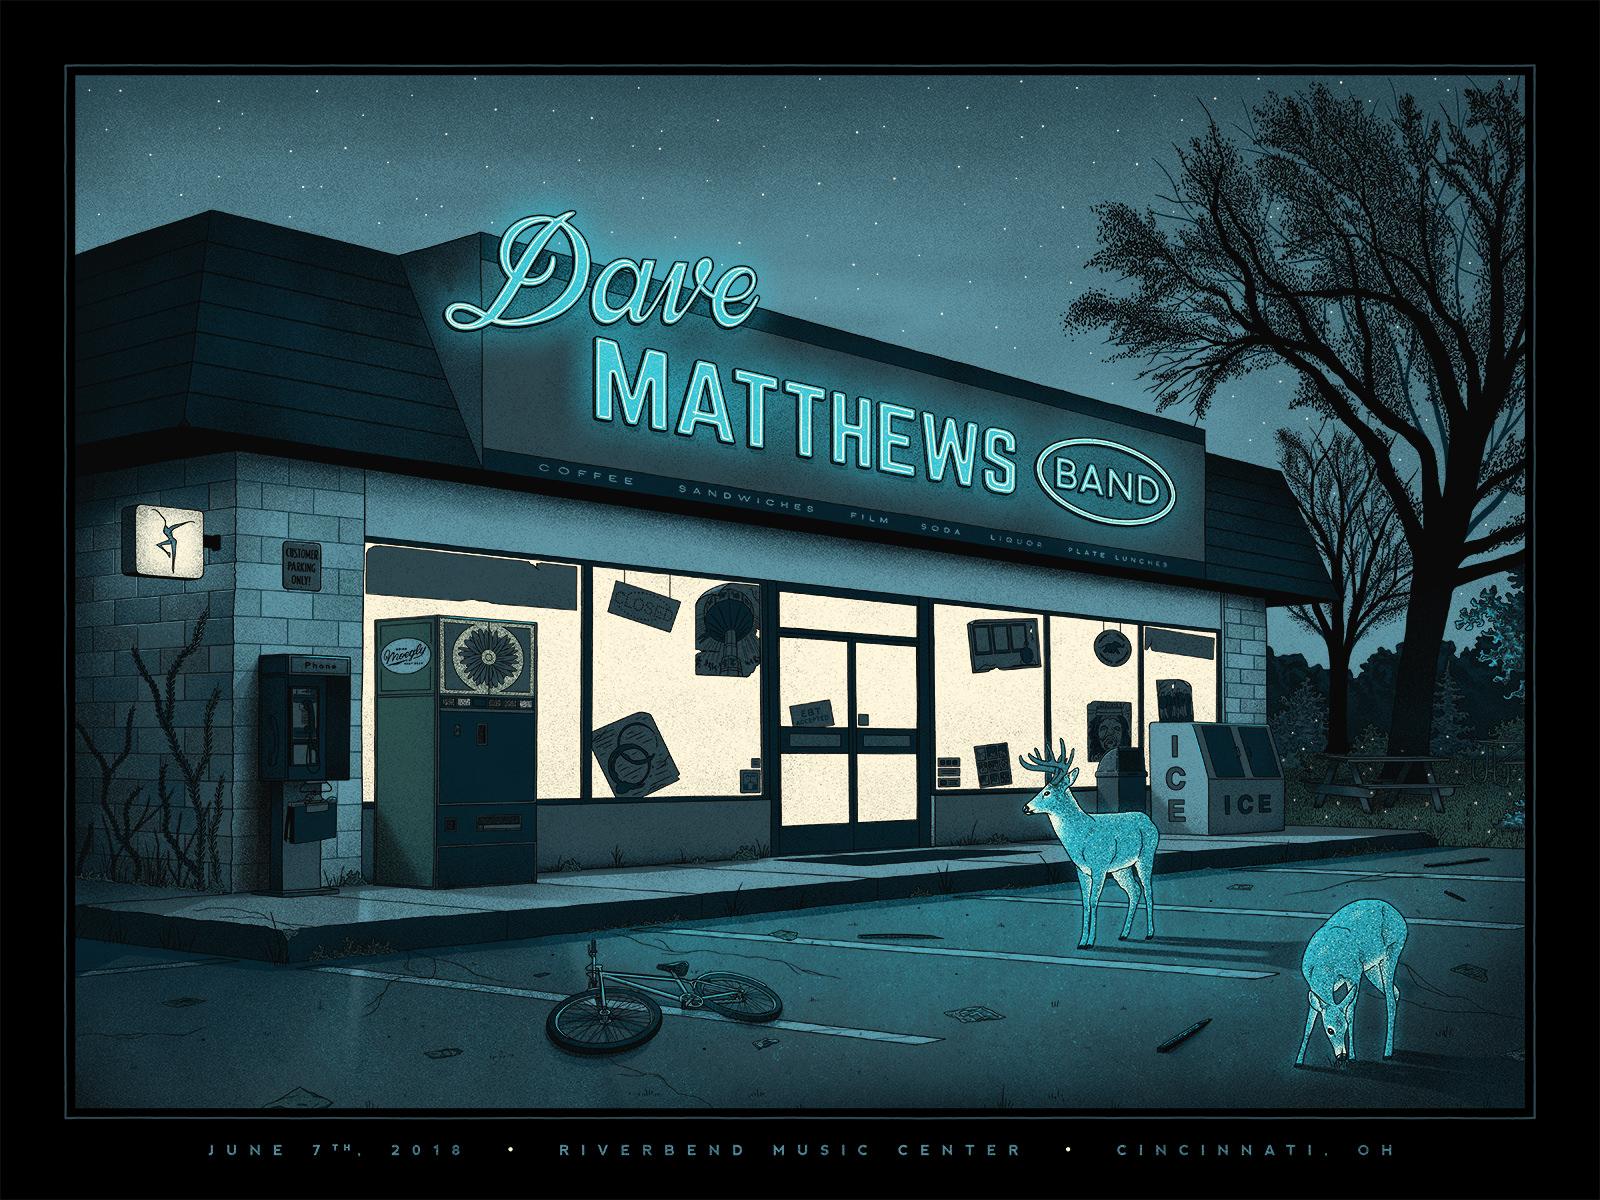 Poster I made for Dave Matthews Band for their show in Cincinnati last night